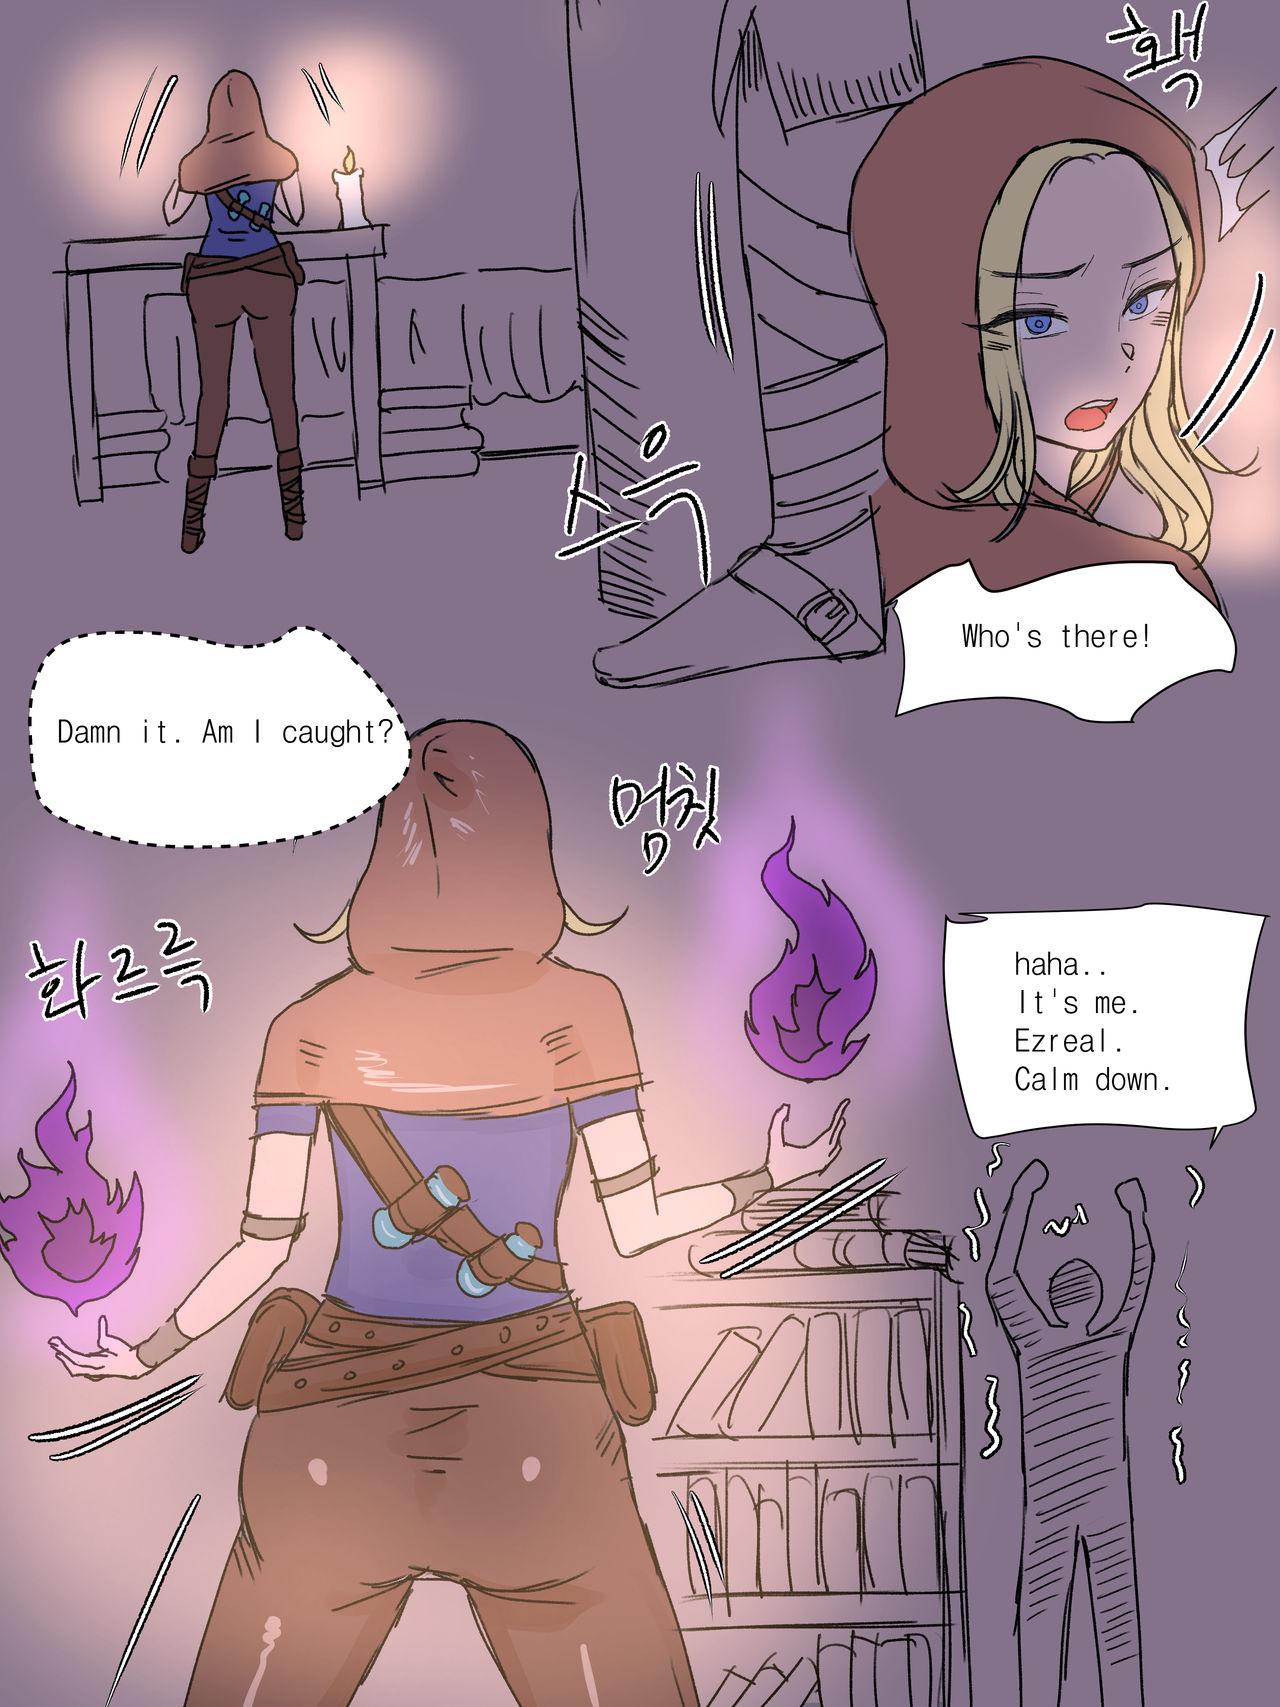 Nice Tits Spellthief Lux - League of legends Online - Page 3